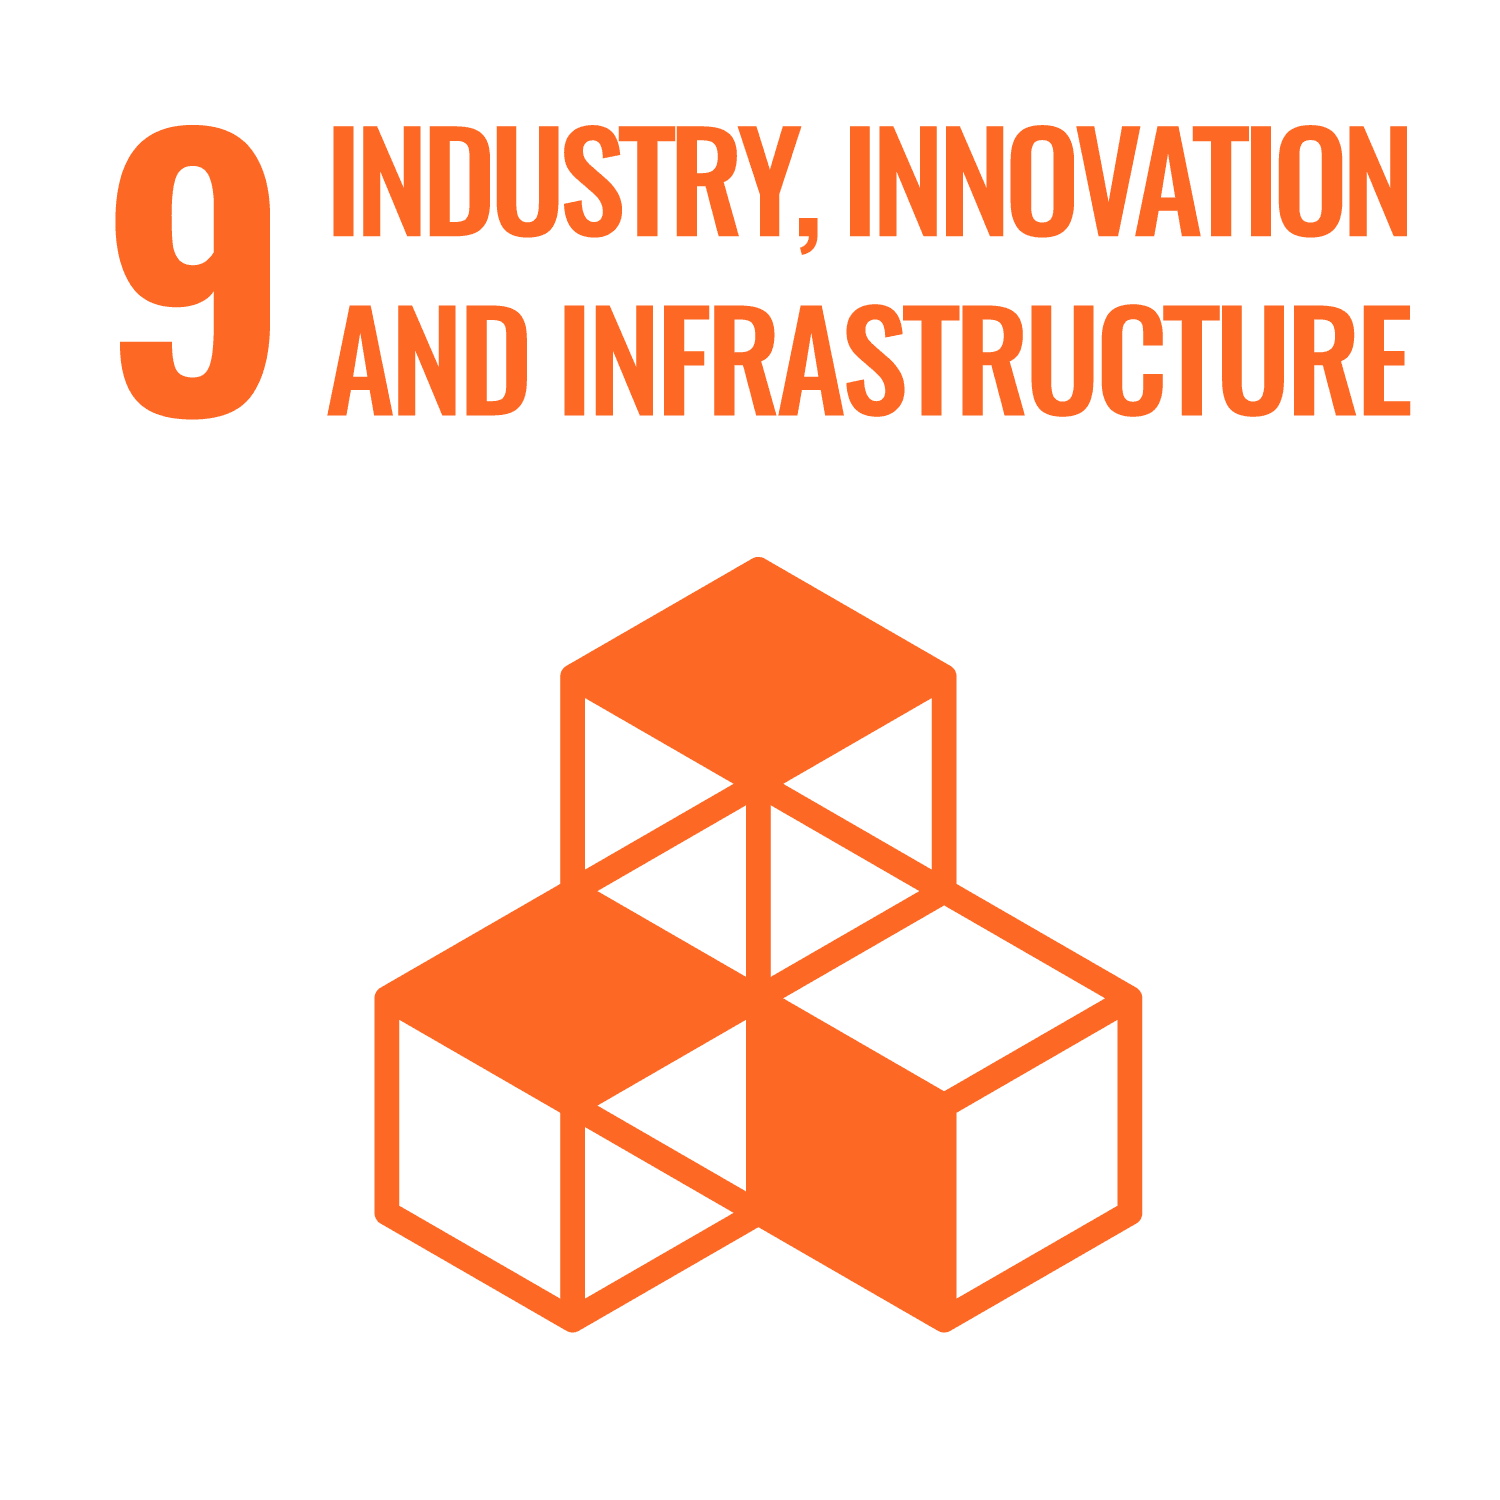 Goal 9, Industry, innovation and infrastructure